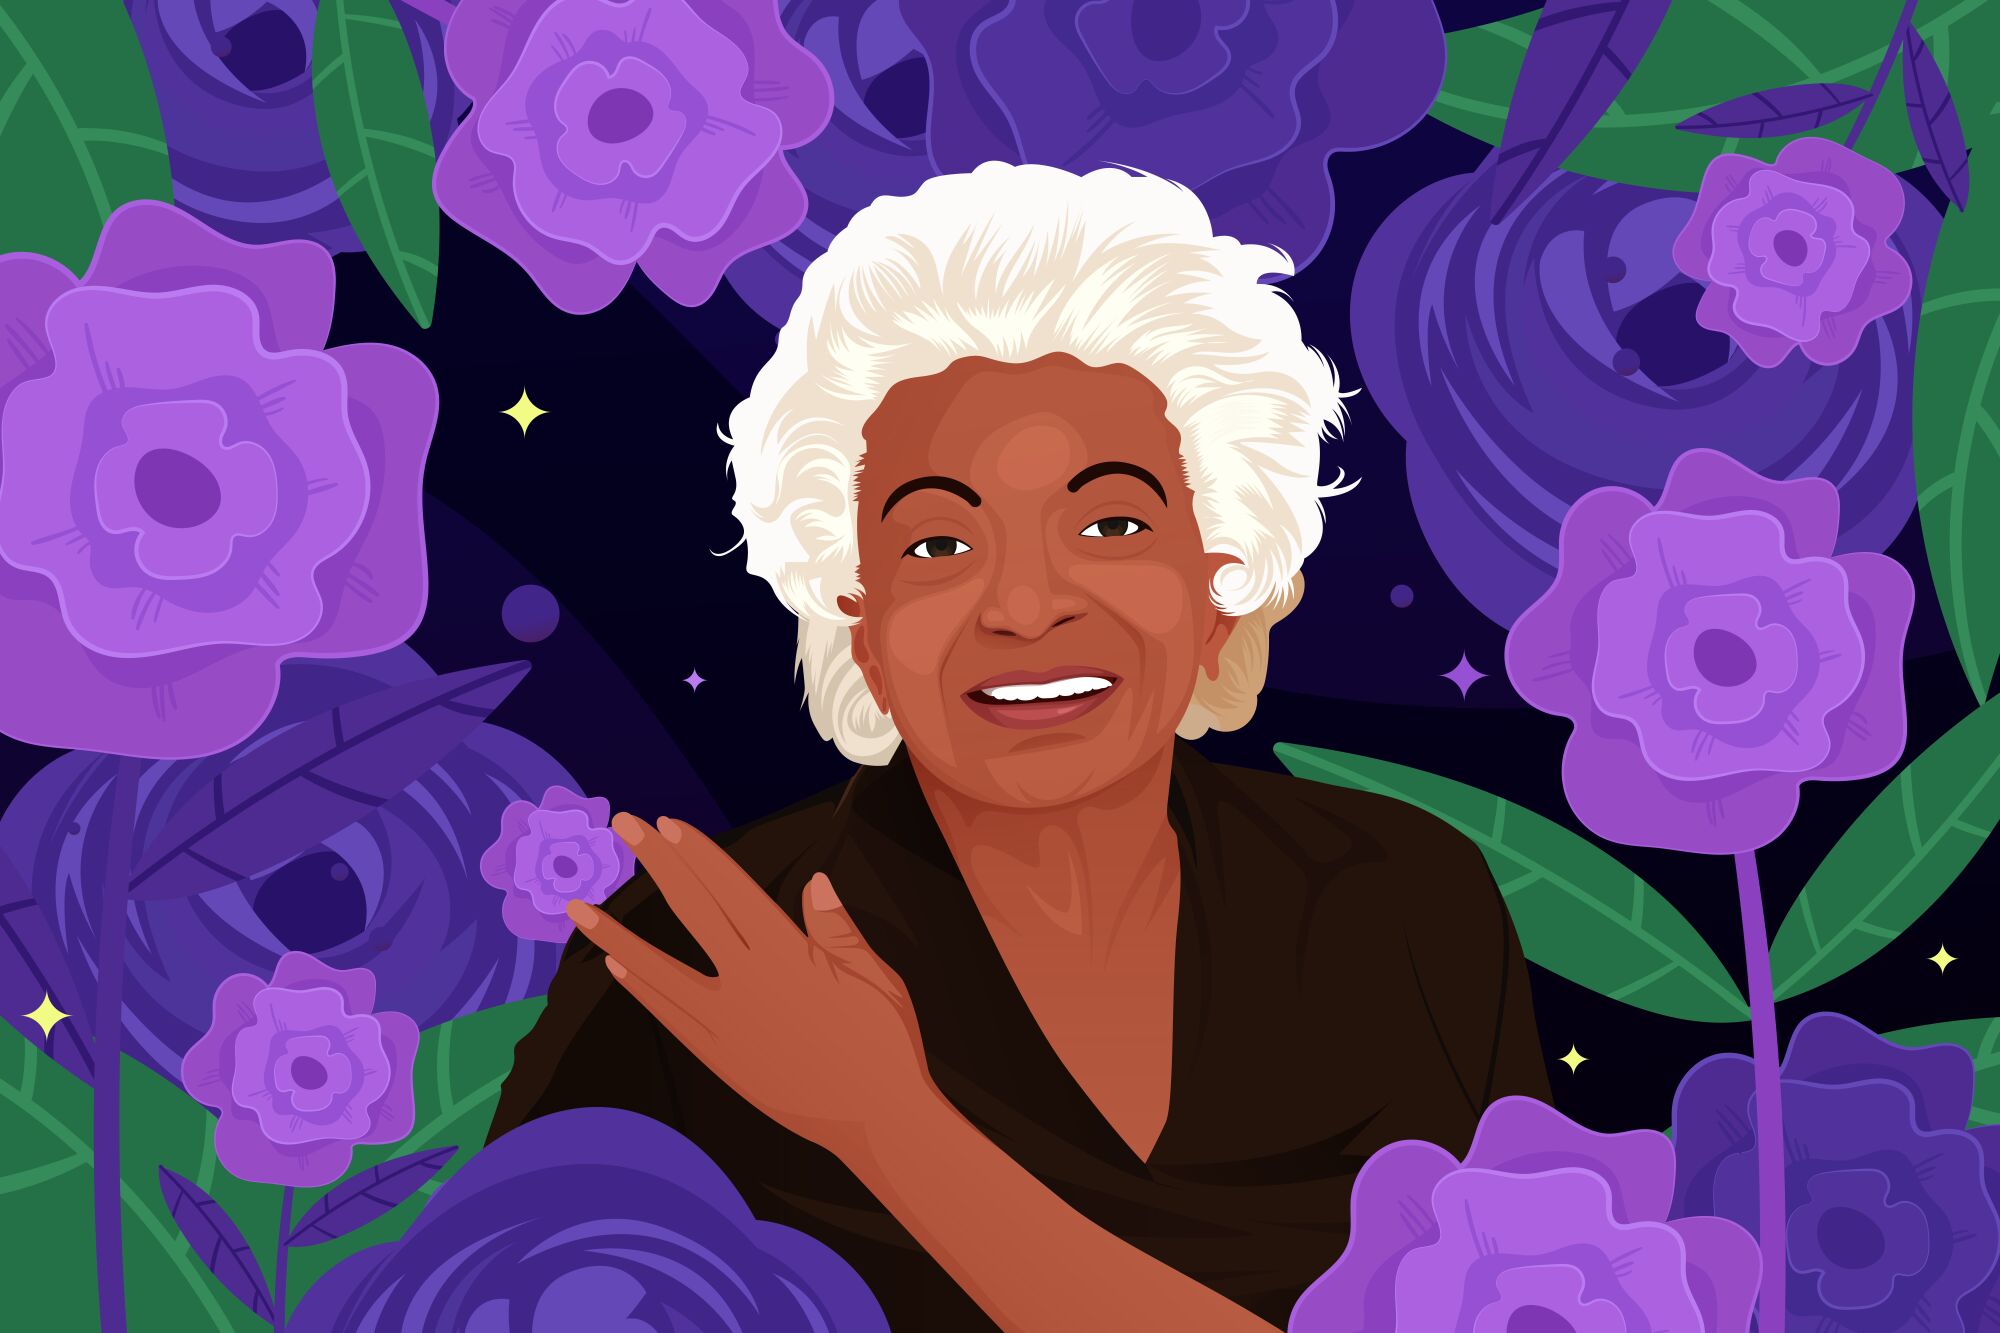 Illustration of Nichelle Nichols spreading her fingers in a Vulcan salute.